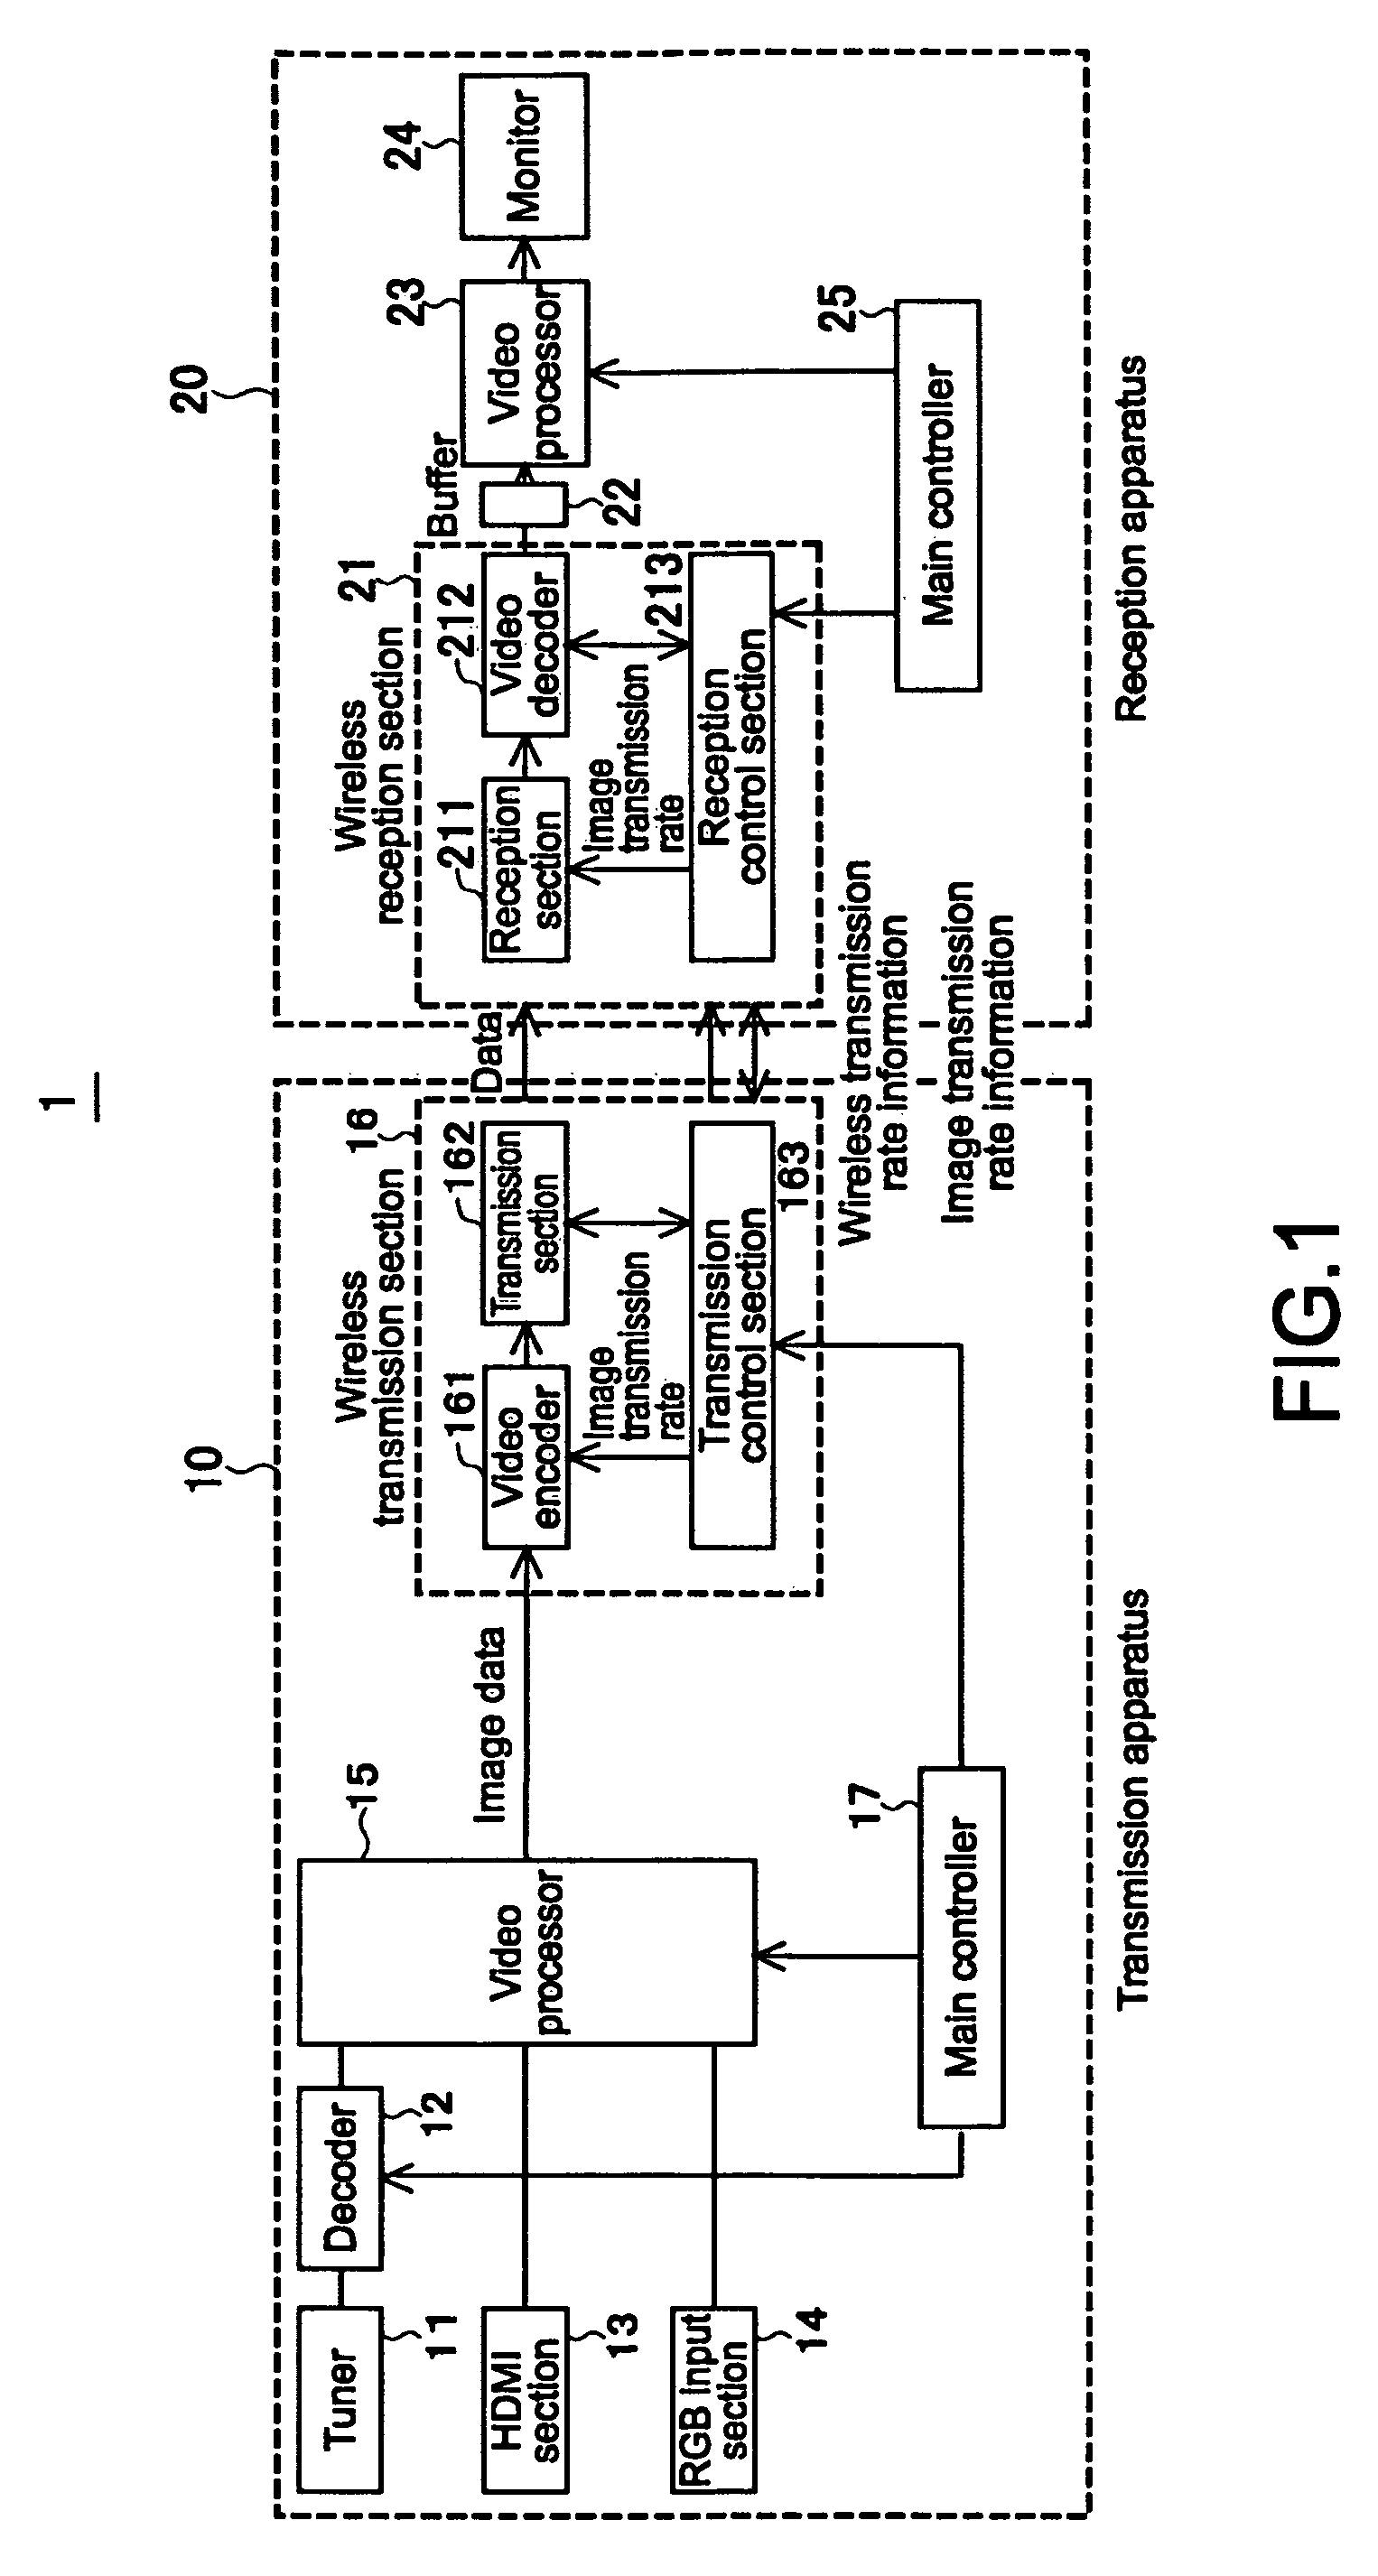 Apparatus and method to accommodate changes in communication quality